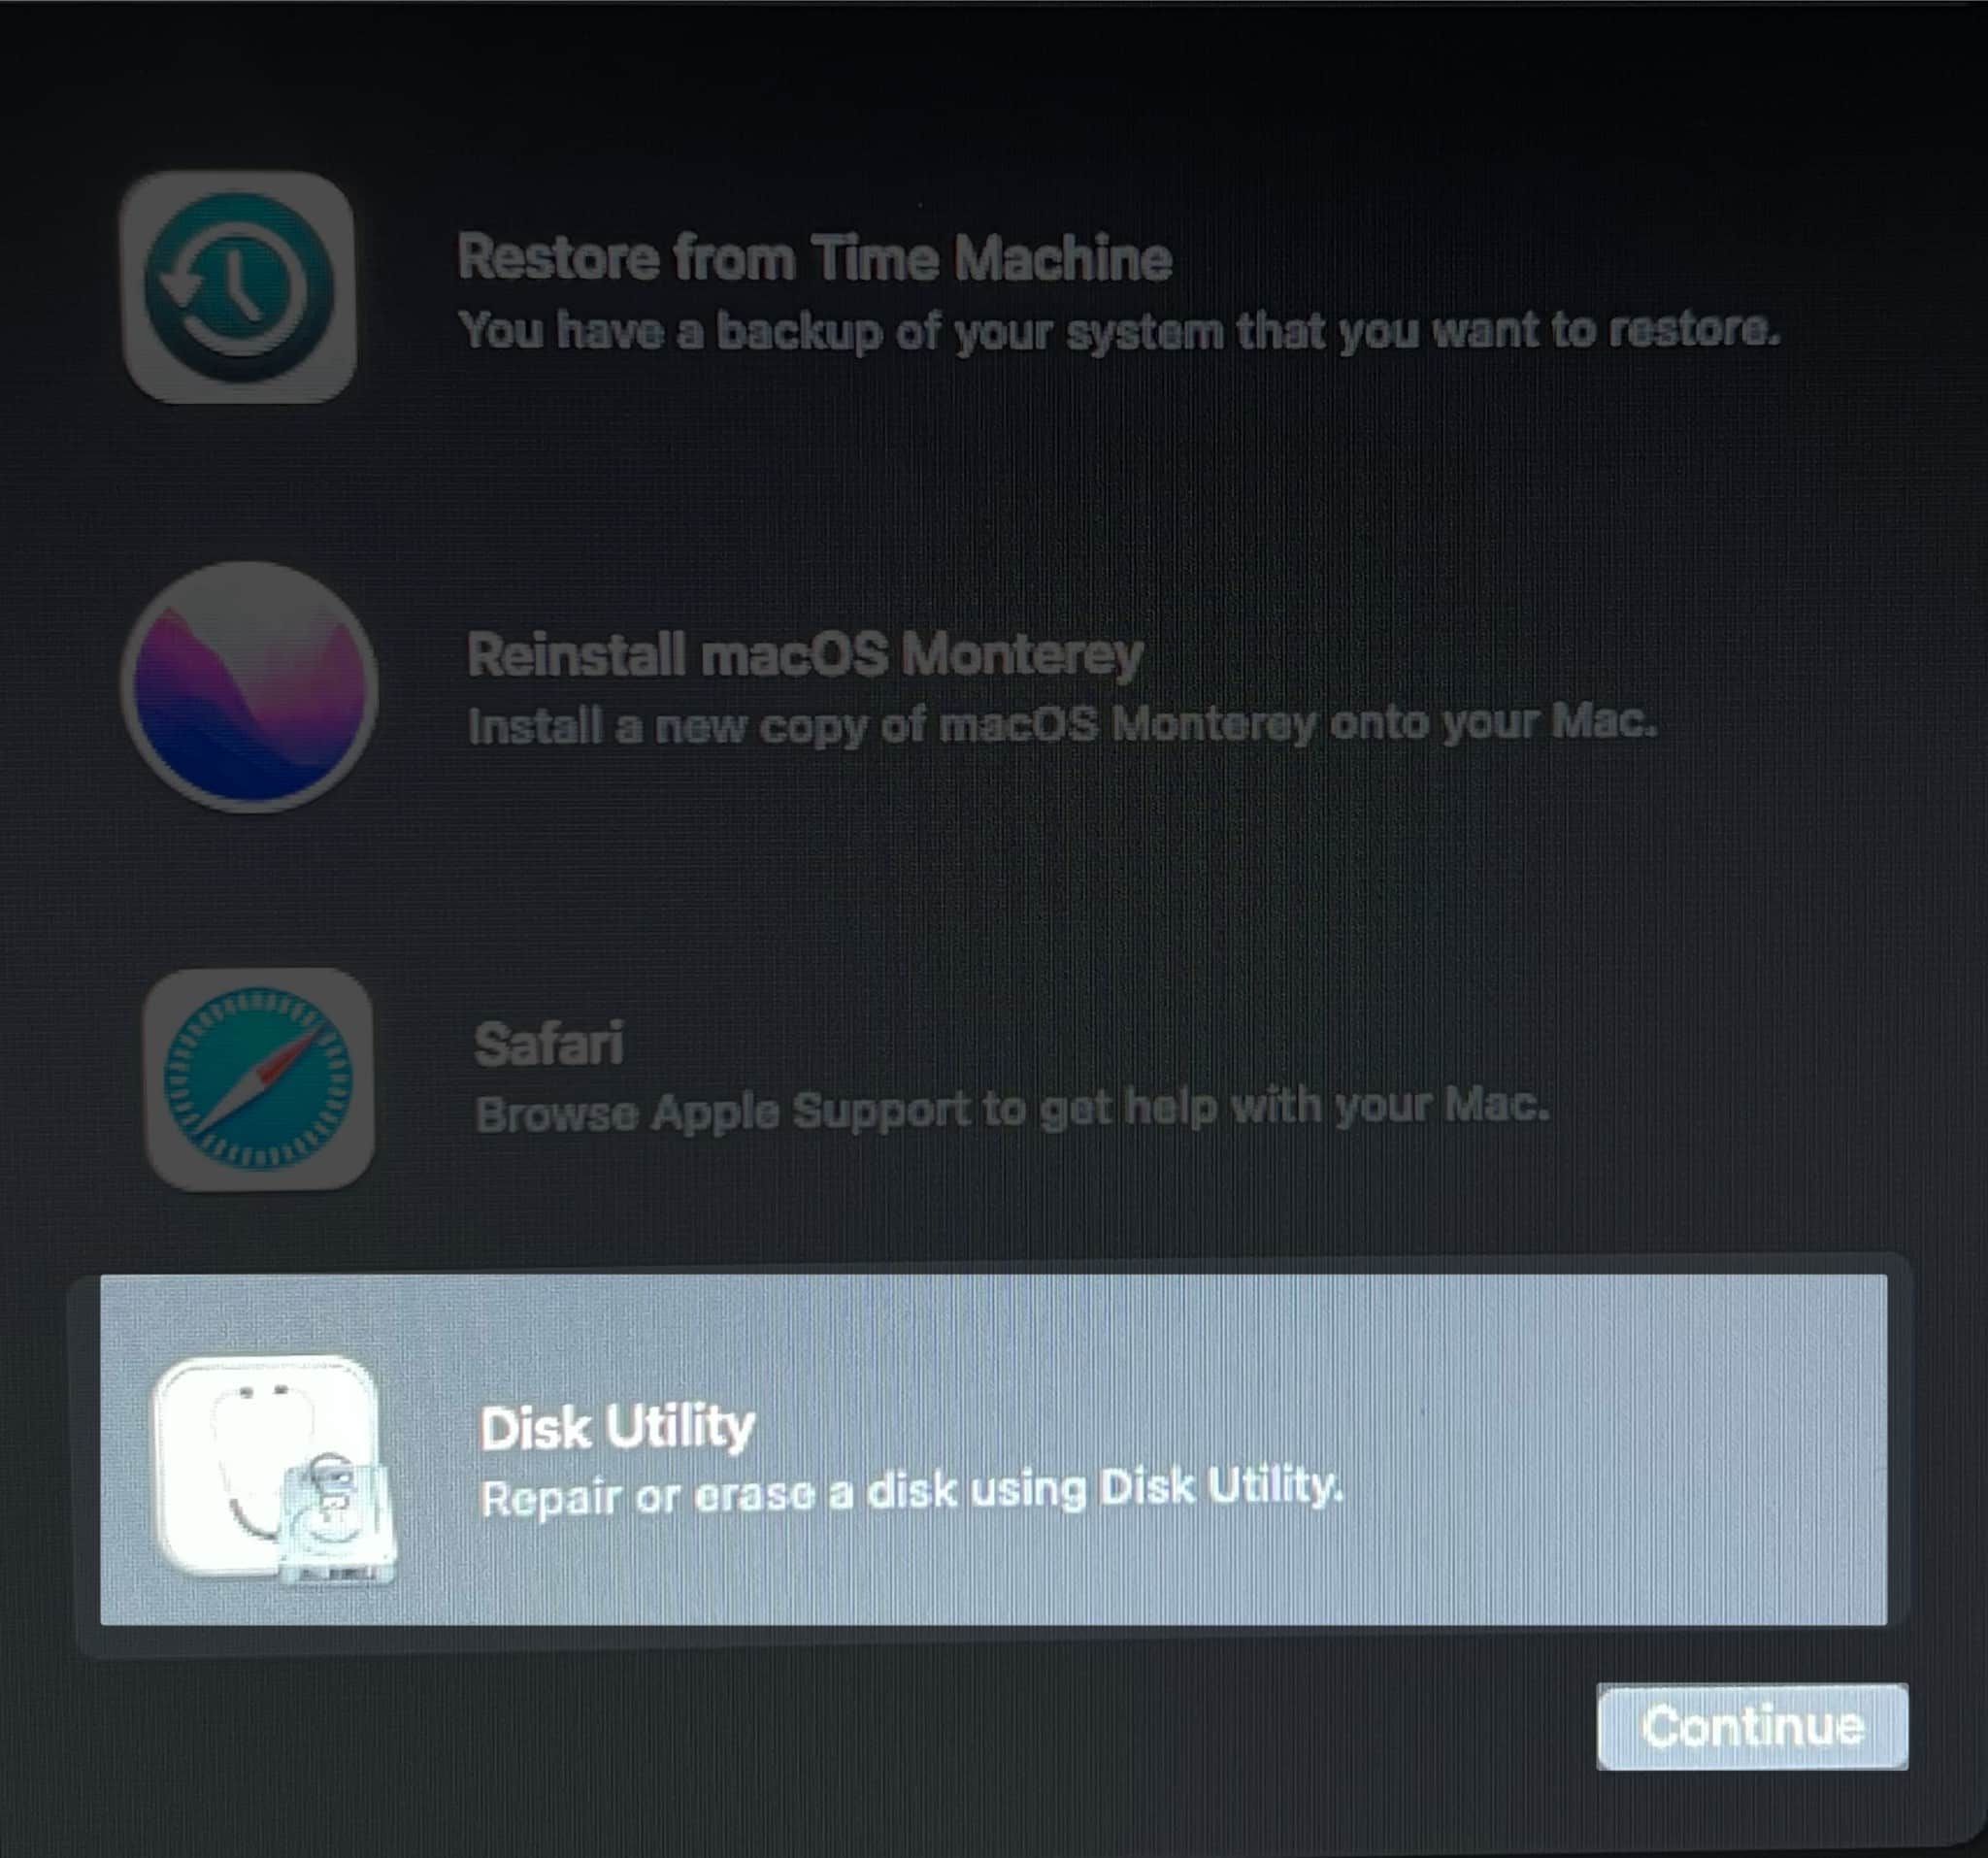 Select Disk utility and continue in recovery mode